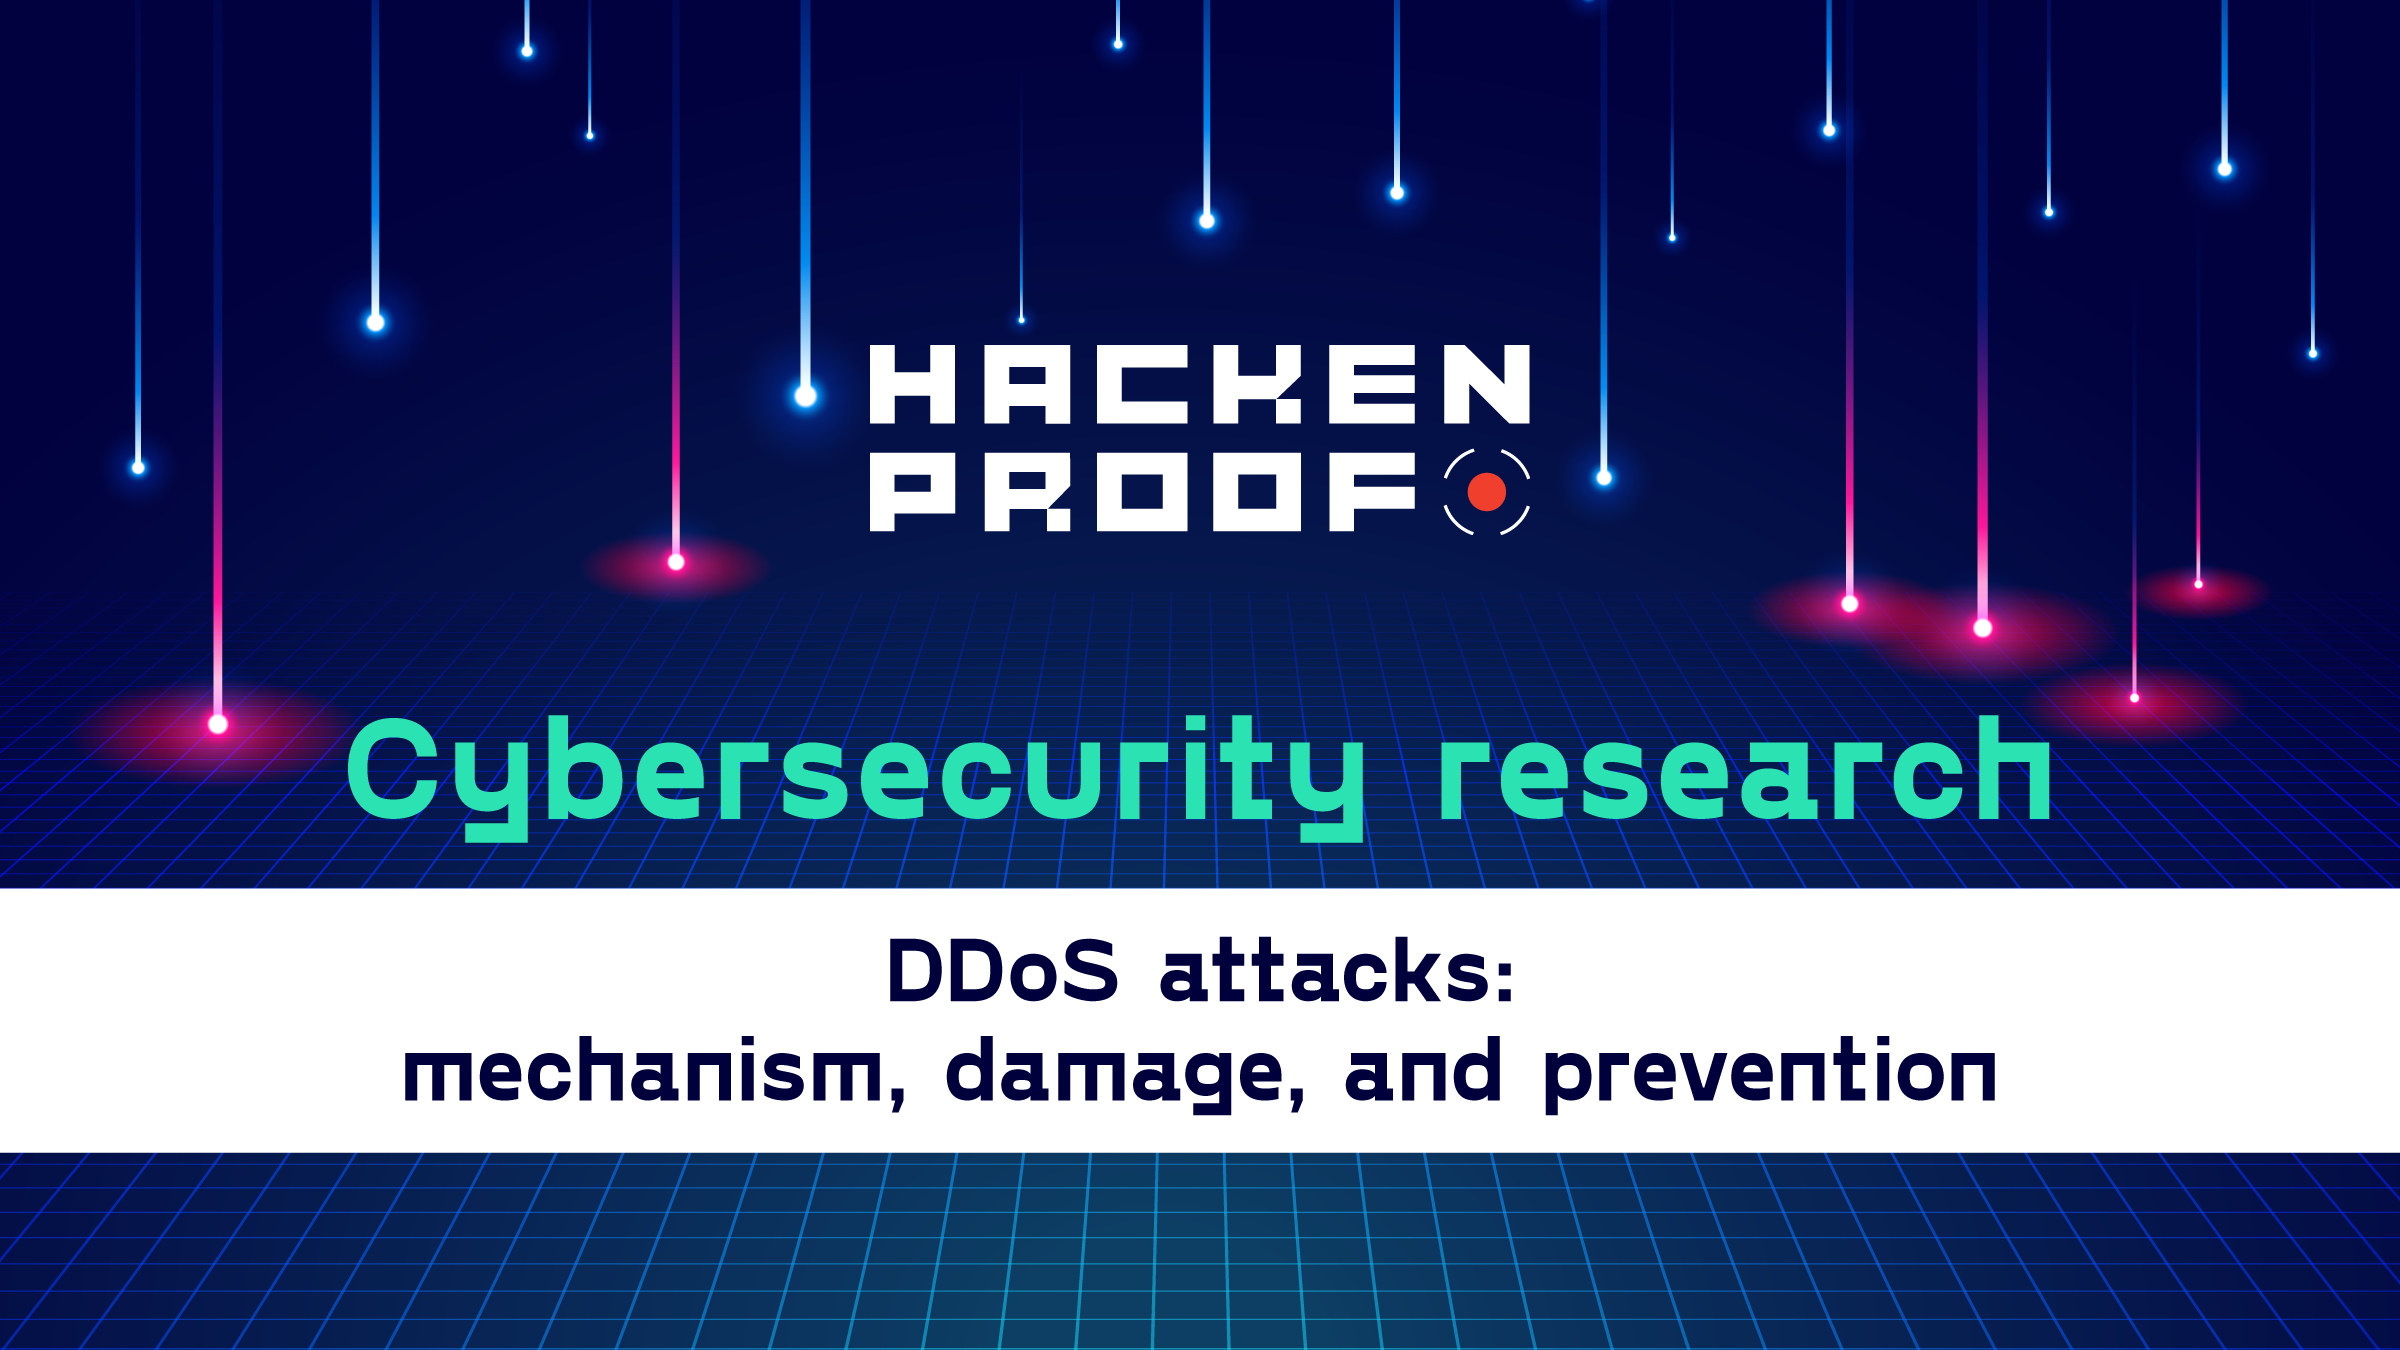 DDoS attacks: mechanism, damage, and prevention